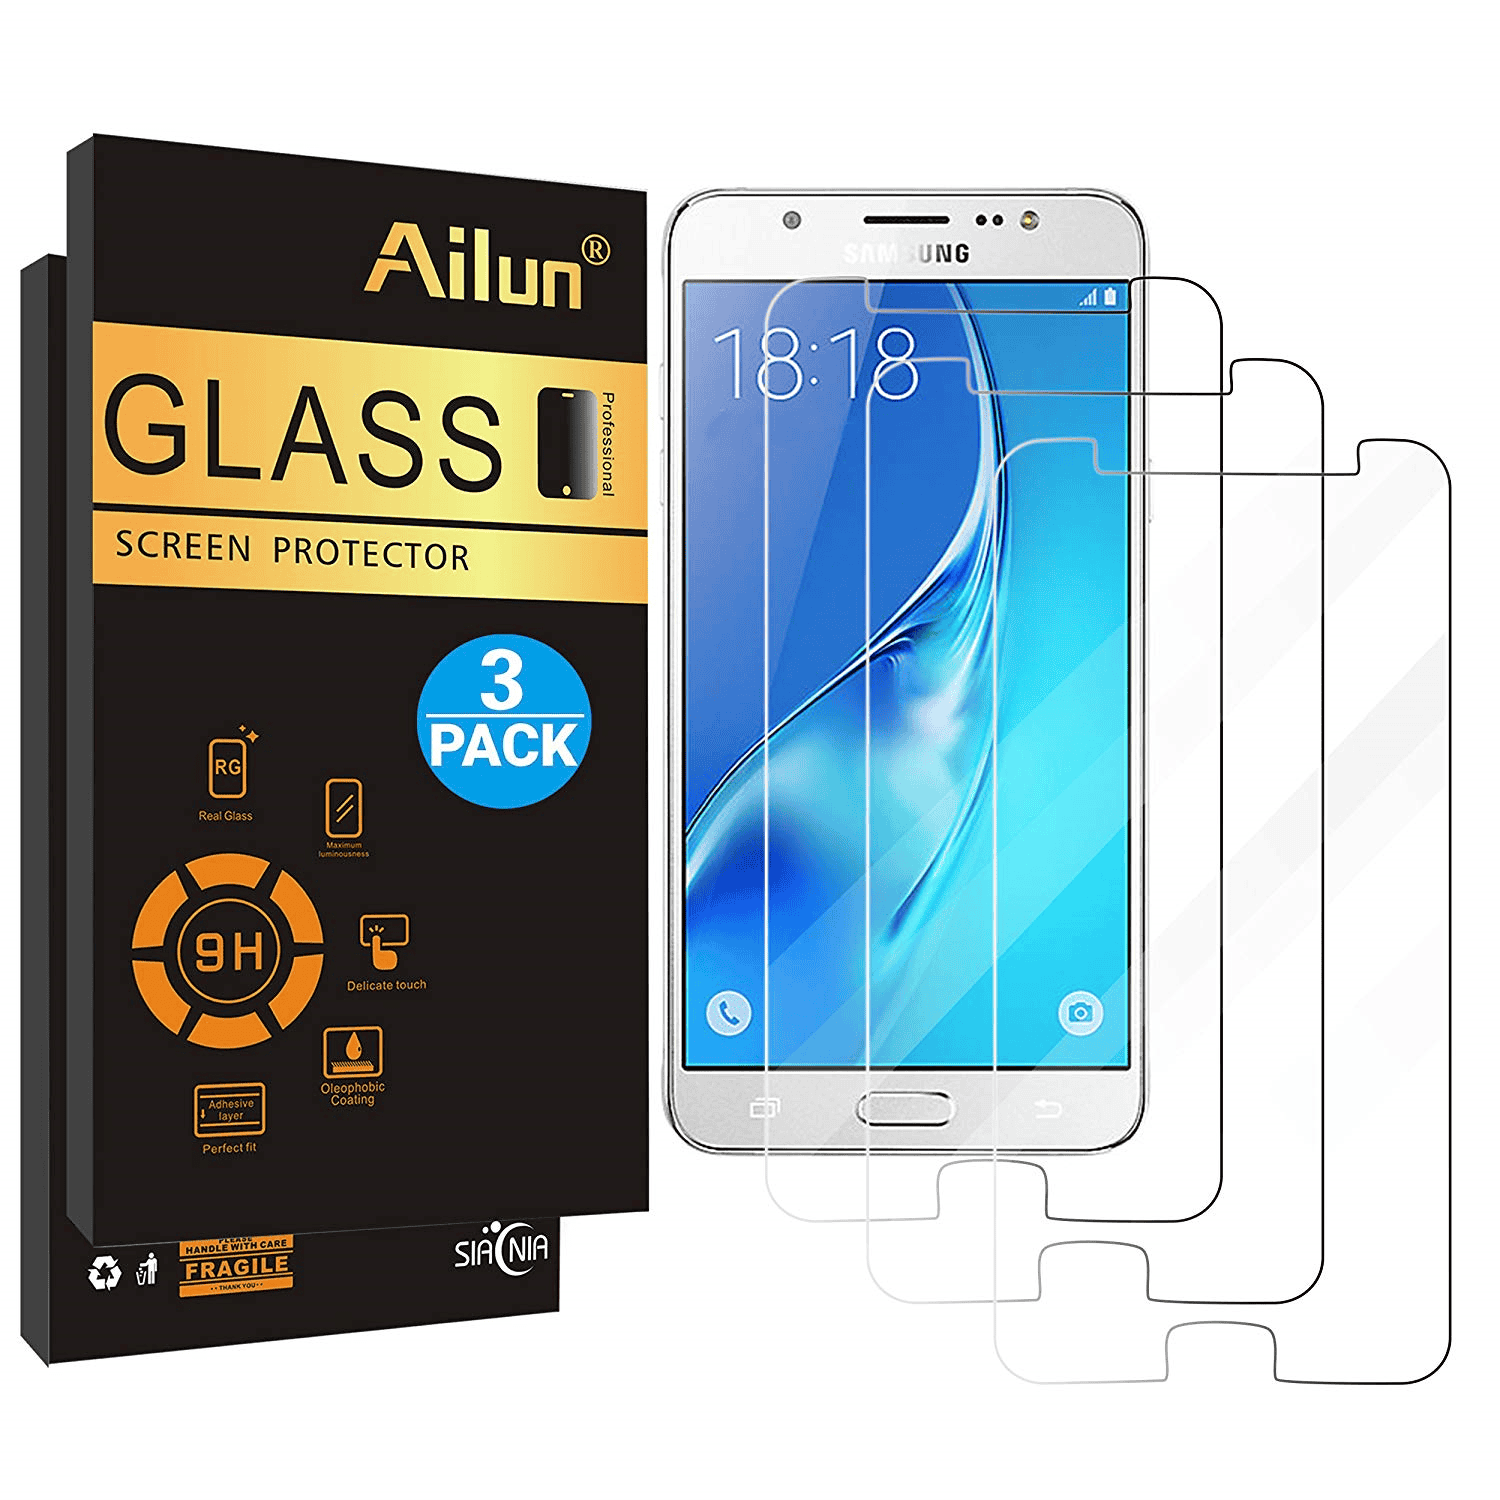 Bubble Free Tempered Glass Screen Protector Film for Samsung Galaxy J7 2018 9H Hardness Anti Fingerprint CUSKING Screen Protector for Galaxy J7 2018 3 Pack 